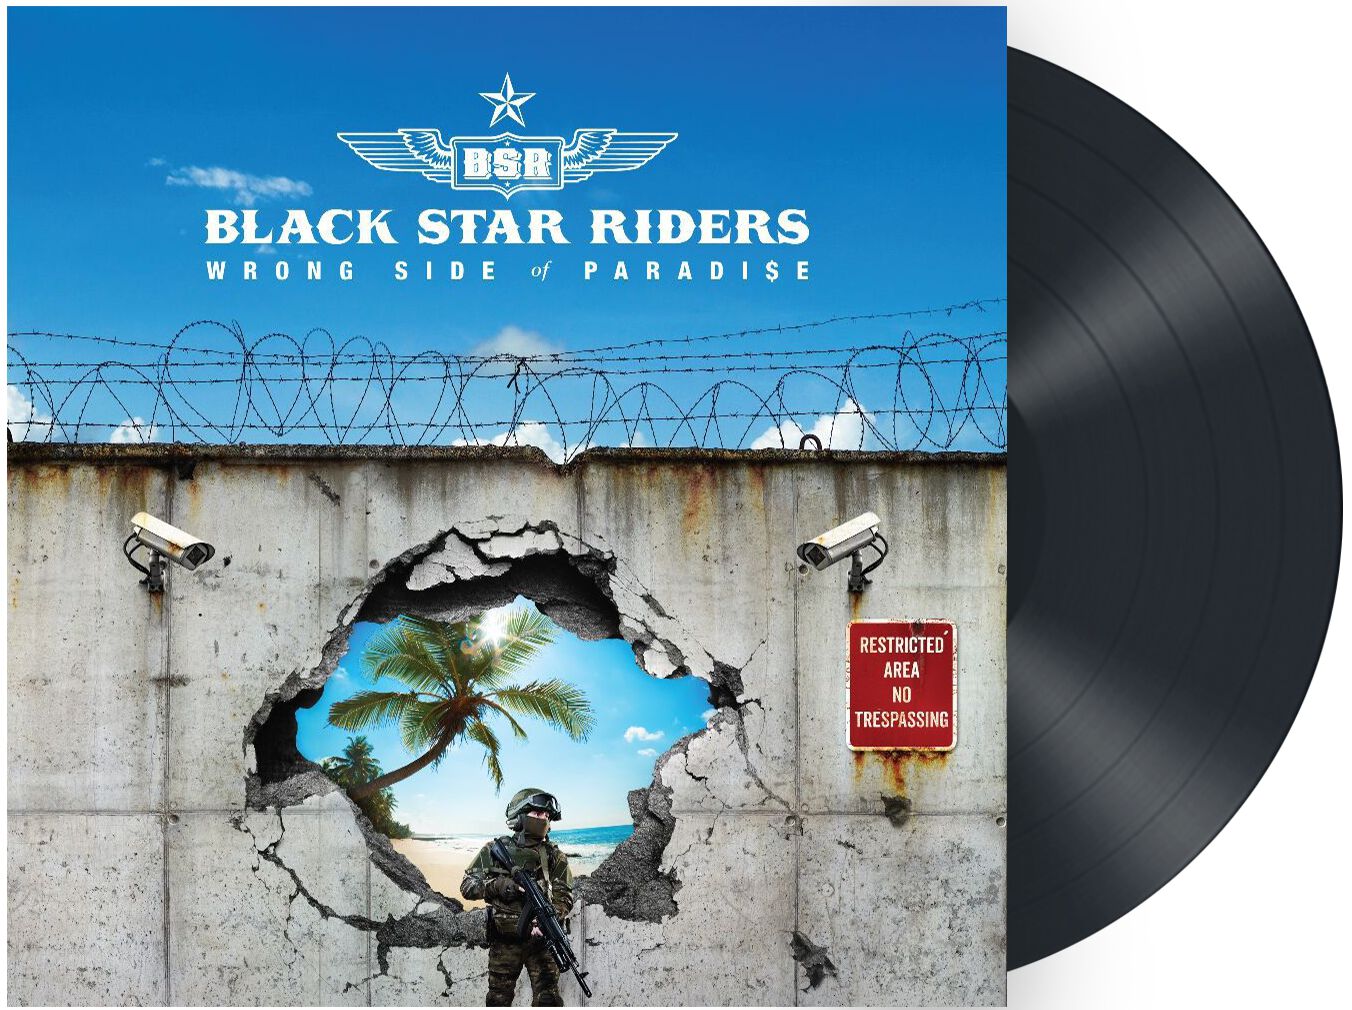 Black Star Riders Wrong side of paradise LP black